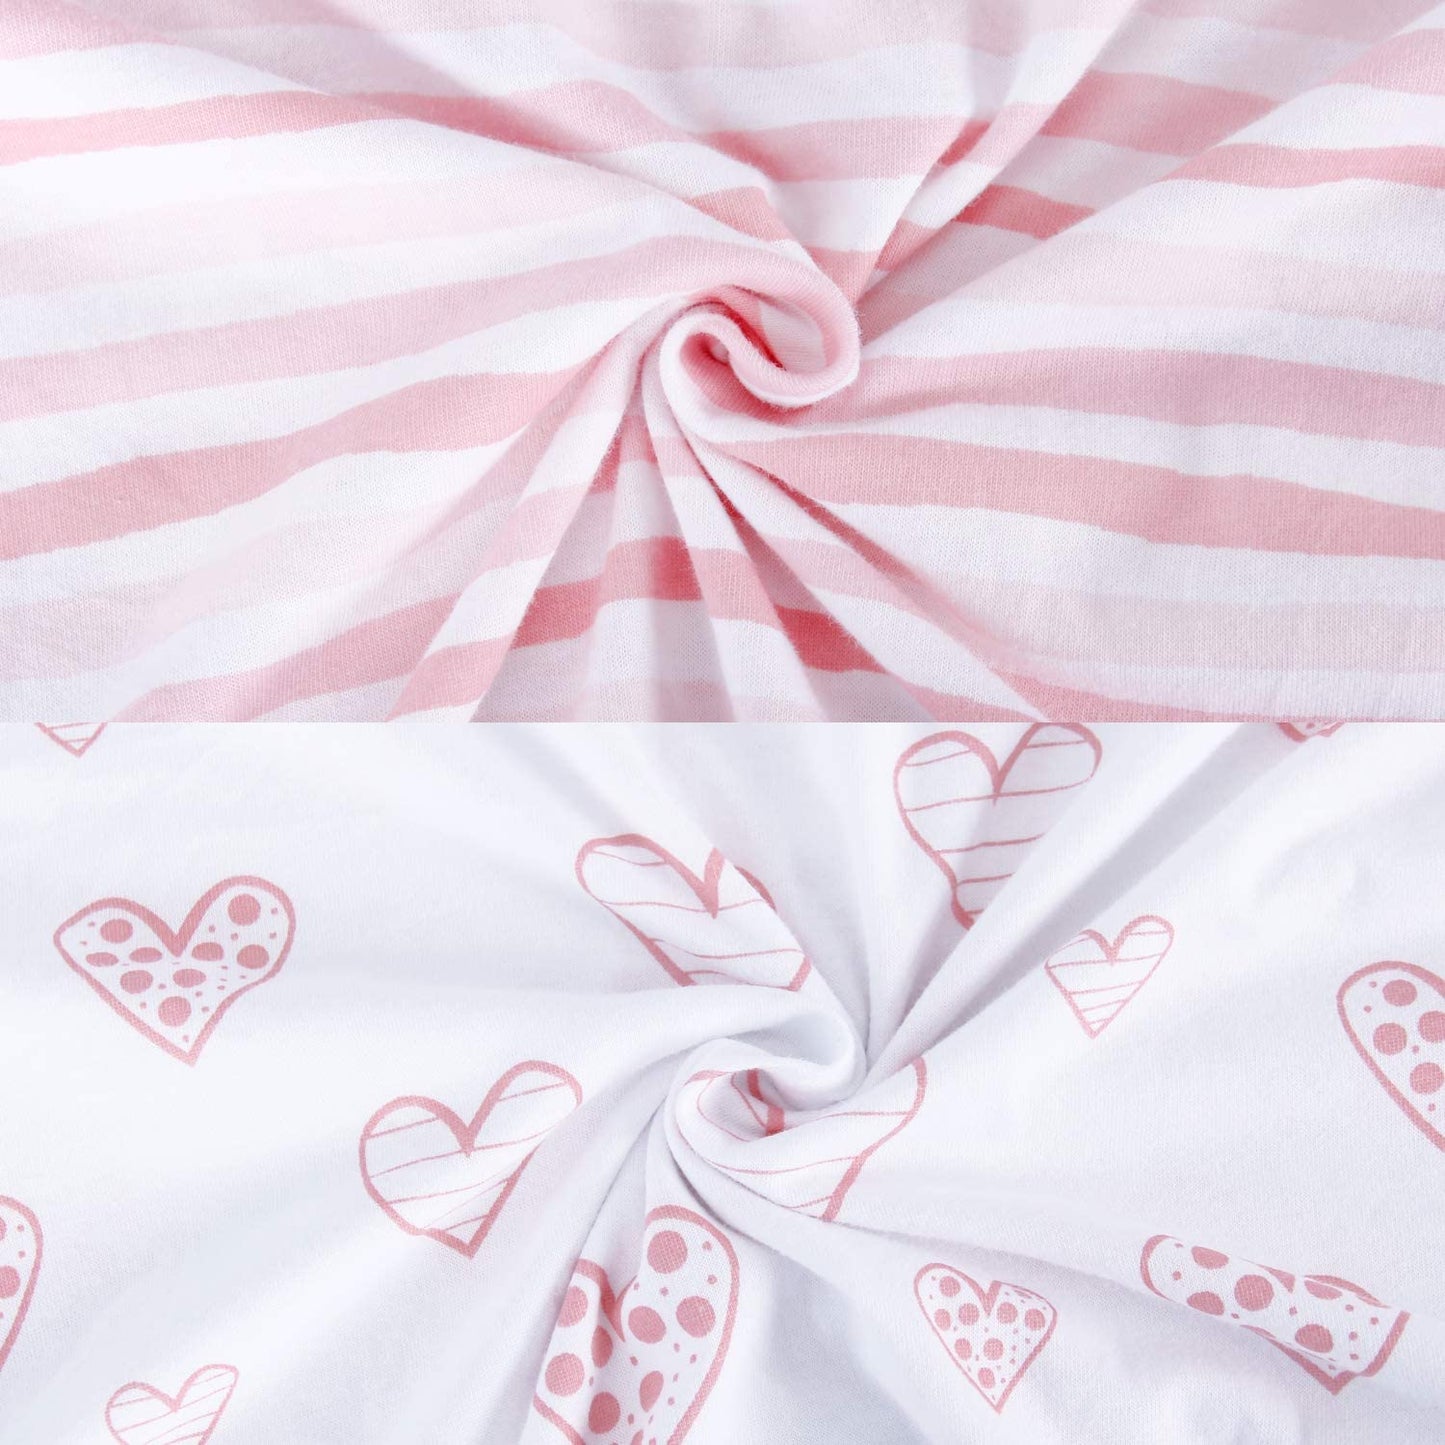 Shop by Brand/Model - Bassinet Sheets, 2 Pack, 100% Jersey Cotton, Pink & White